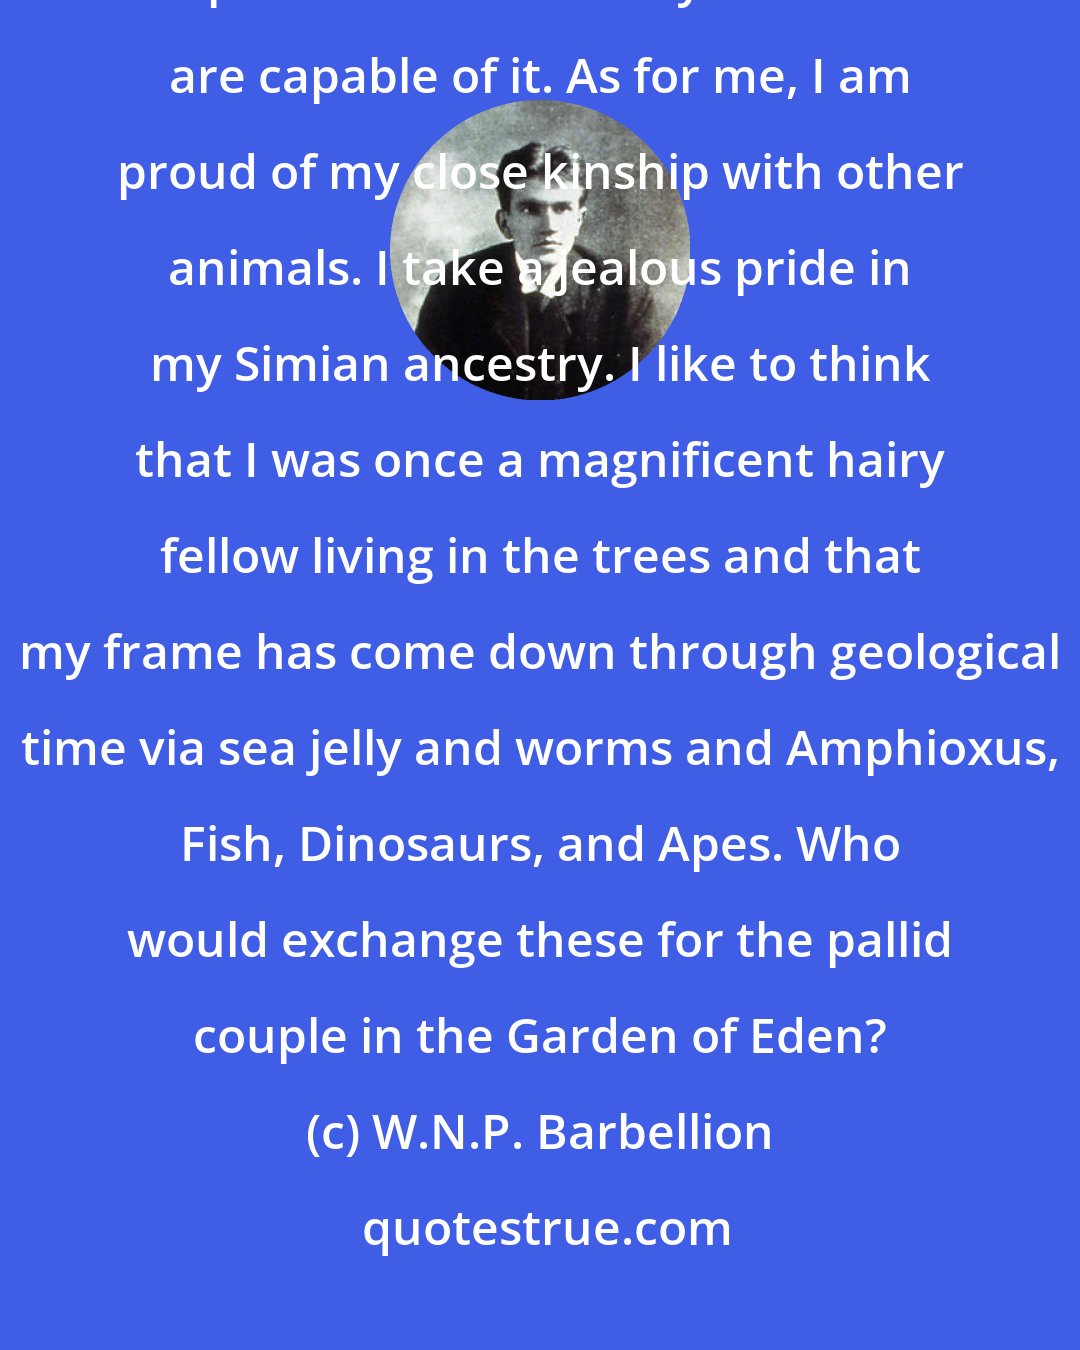 W.N.P. Barbellion: How I hate the man who talks about the 'brute creation', with an ugly emphasis on Brute. Only Christians are capable of it. As for me, I am proud of my close kinship with other animals. I take a jealous pride in my Simian ancestry. I like to think that I was once a magnificent hairy fellow living in the trees and that my frame has come down through geological time via sea jelly and worms and Amphioxus, Fish, Dinosaurs, and Apes. Who would exchange these for the pallid couple in the Garden of Eden?